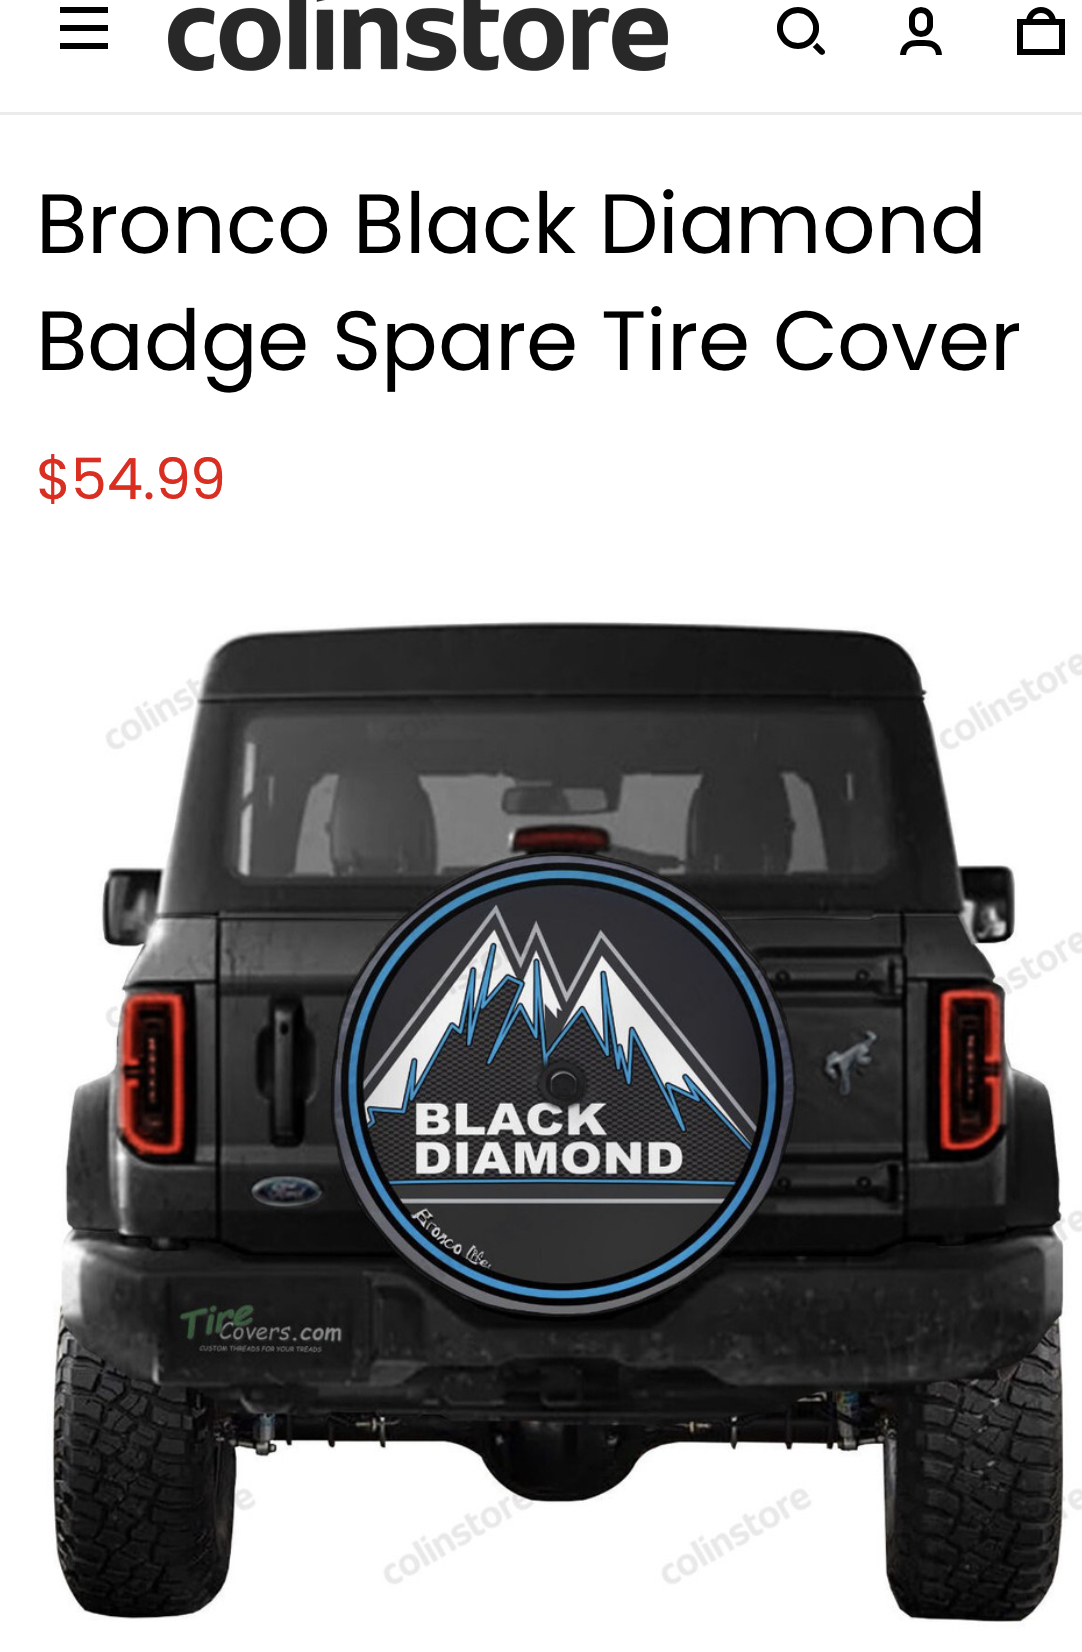 Ford Bronco Spare tire cover or no? 12BBAA23-7A2D-414D-805B-CDD4372EBD56